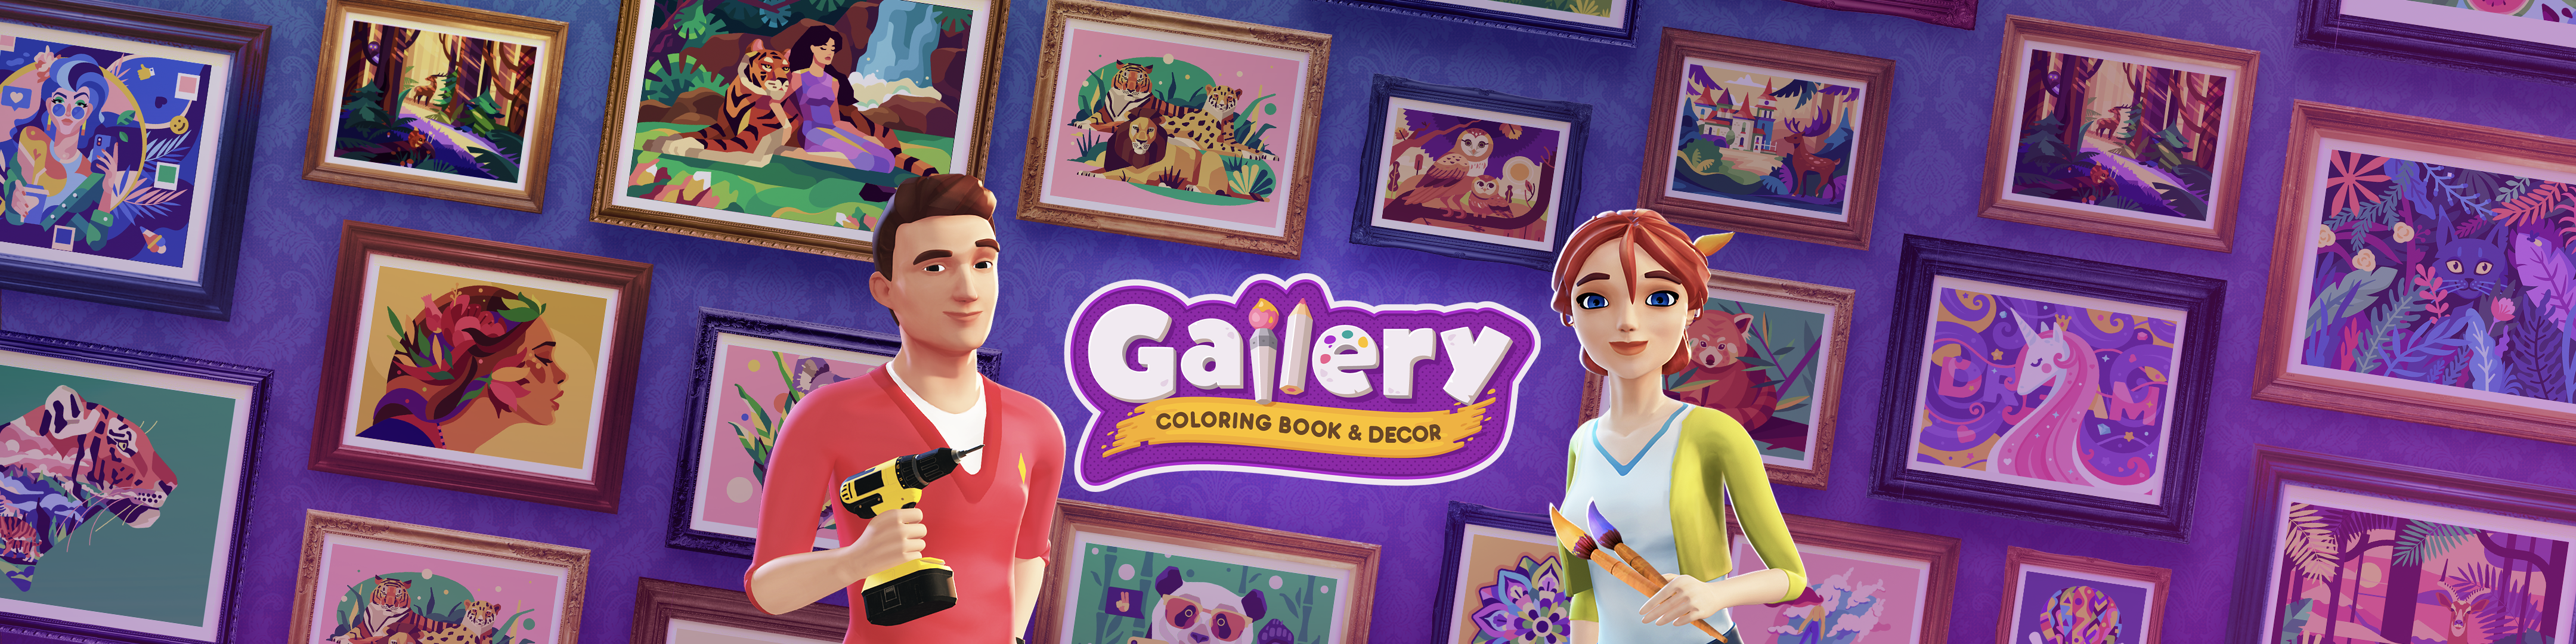 Download Gallery Coloring Book Decor Overview Apple App Store Us